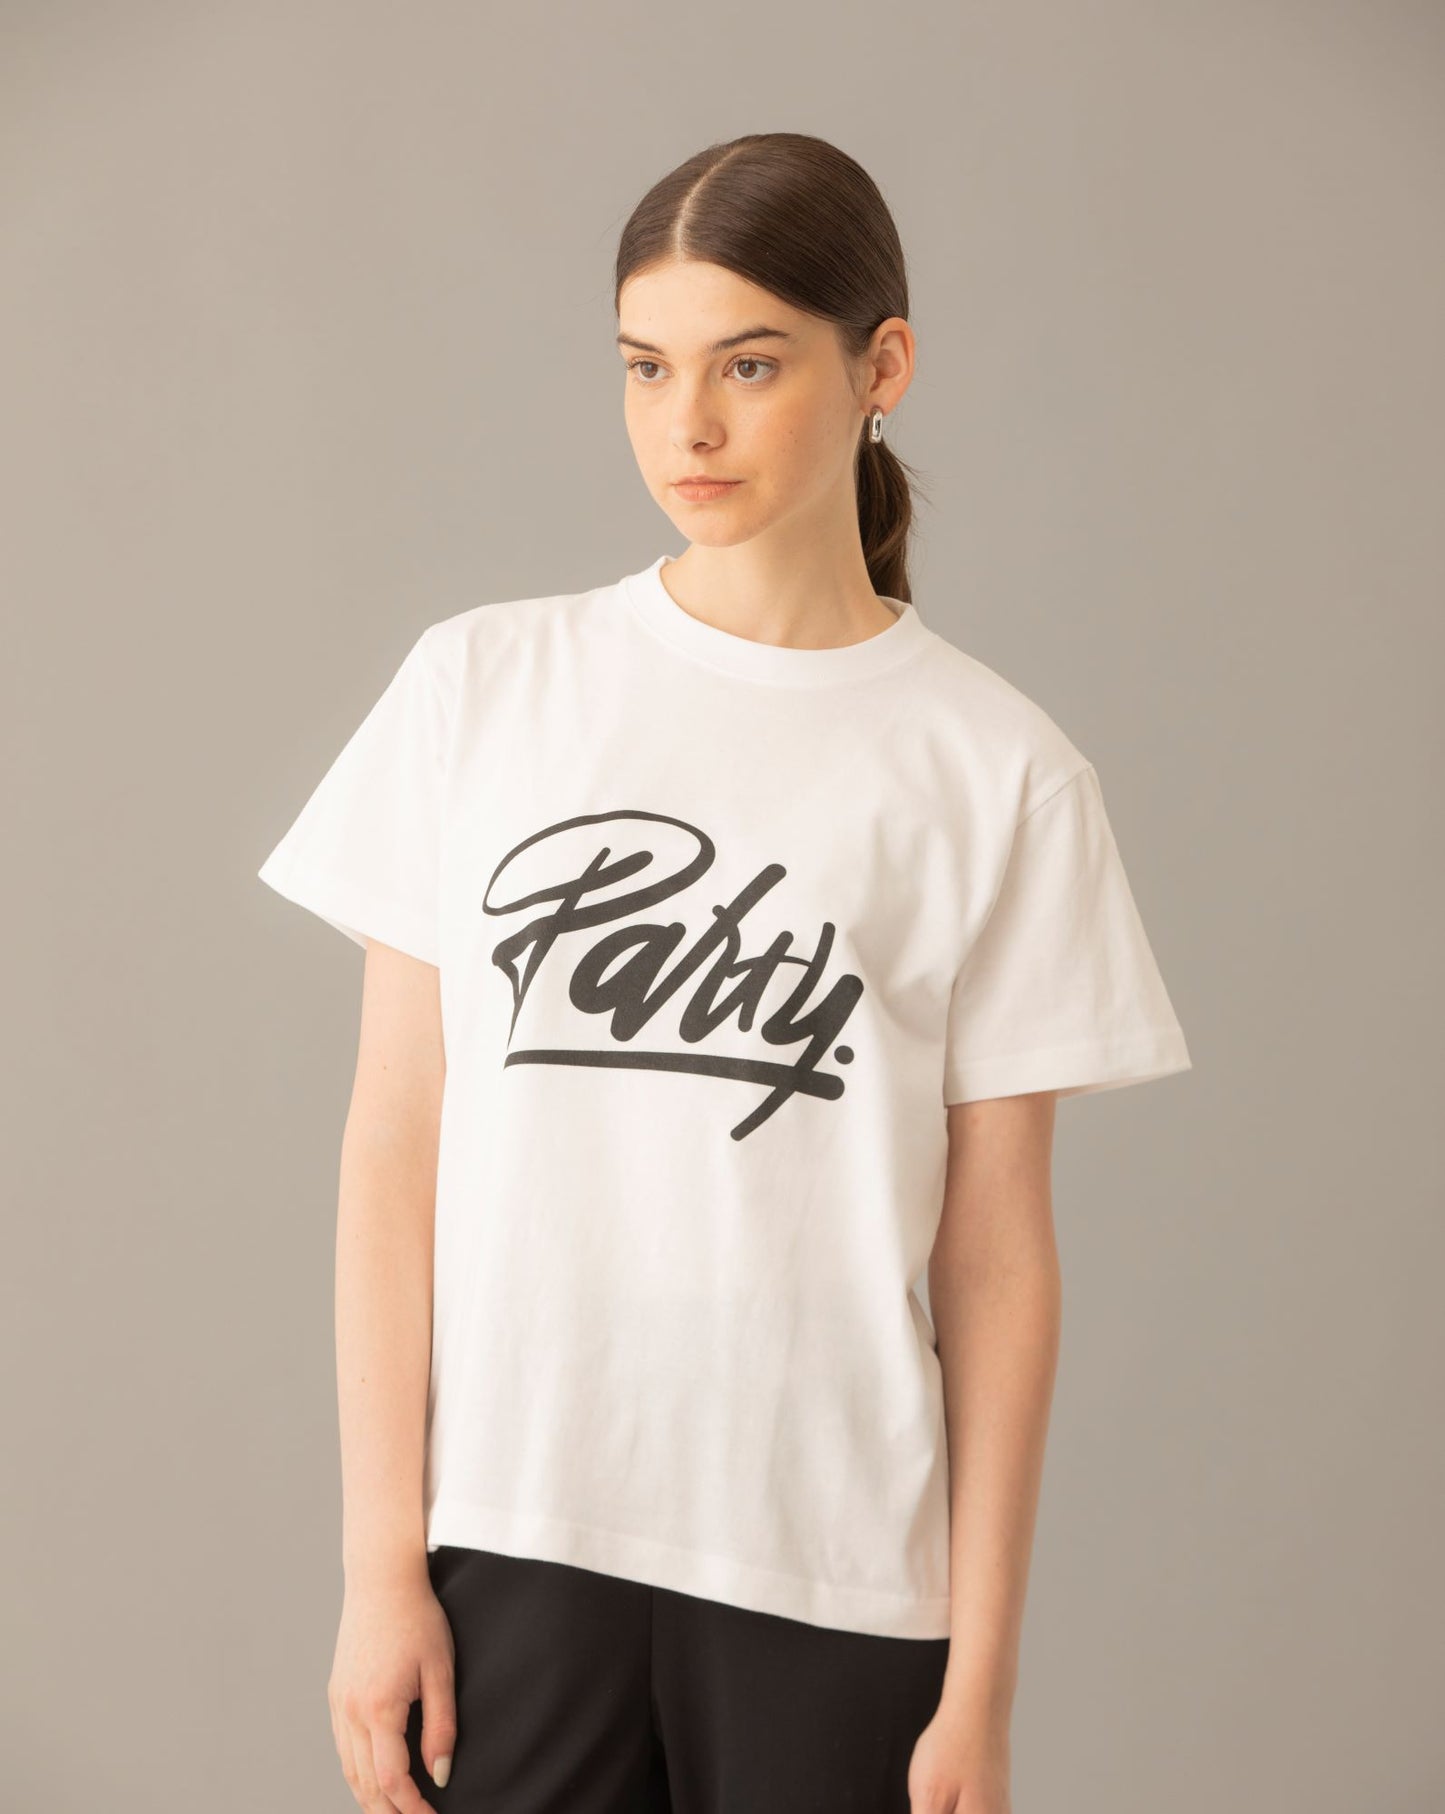 STANDARD BOX TEE  （Party)